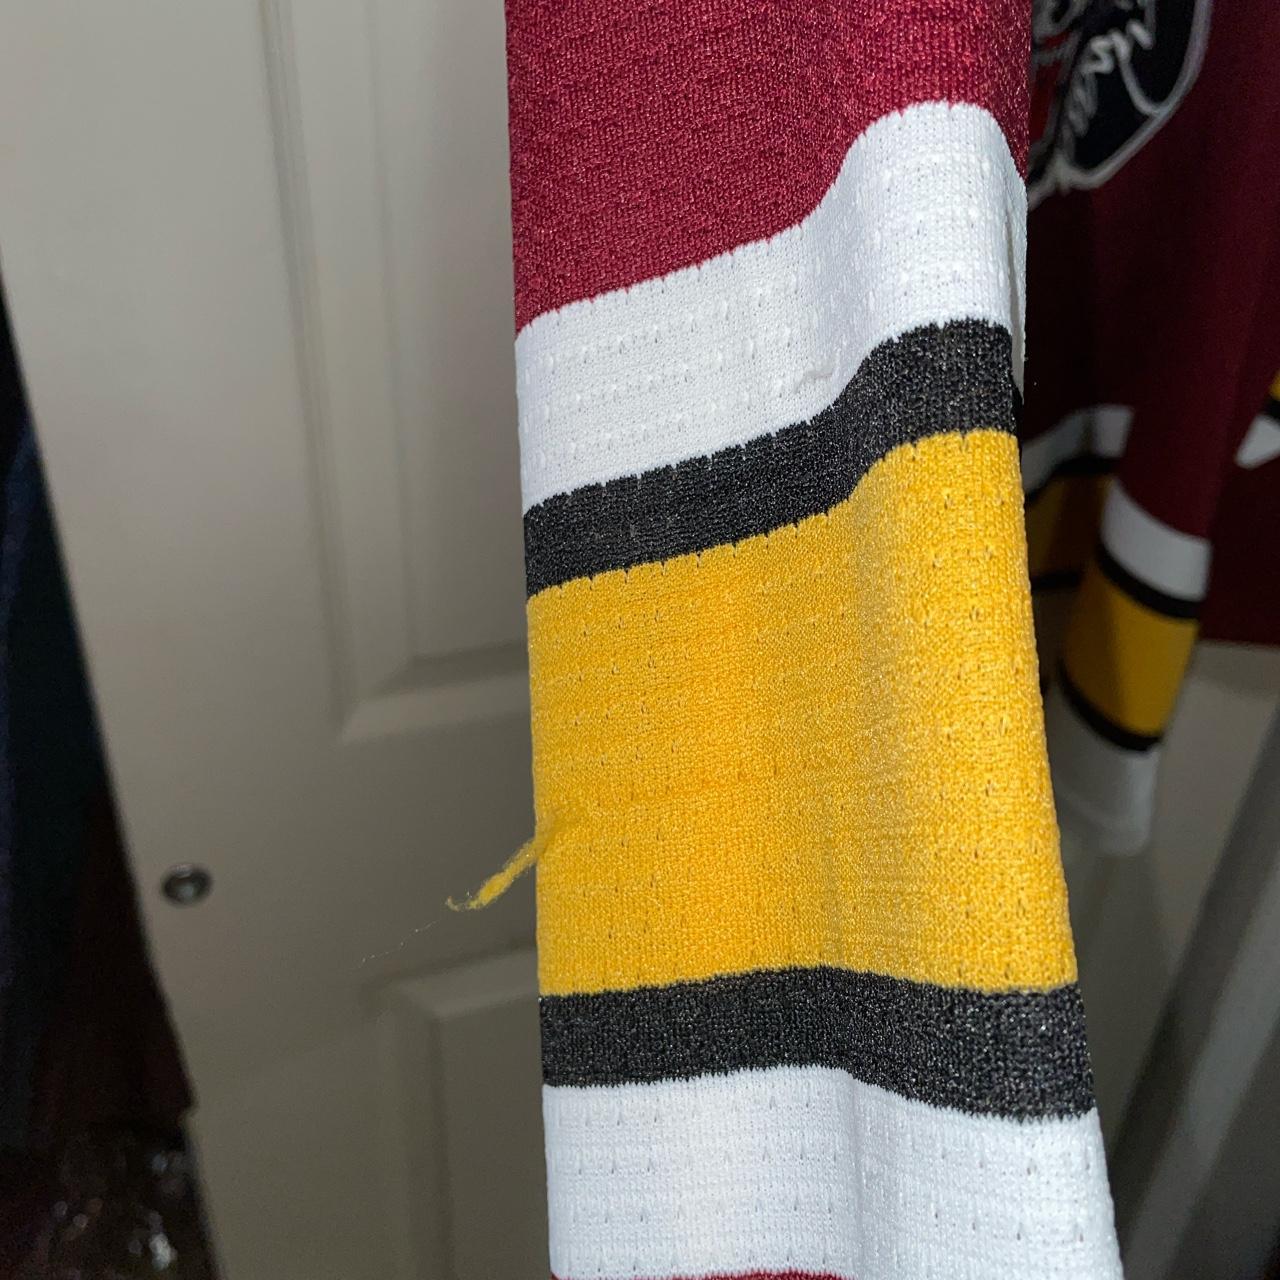 NEW AHL Official CCM Chicago Wolves Ice Hockey - Depop